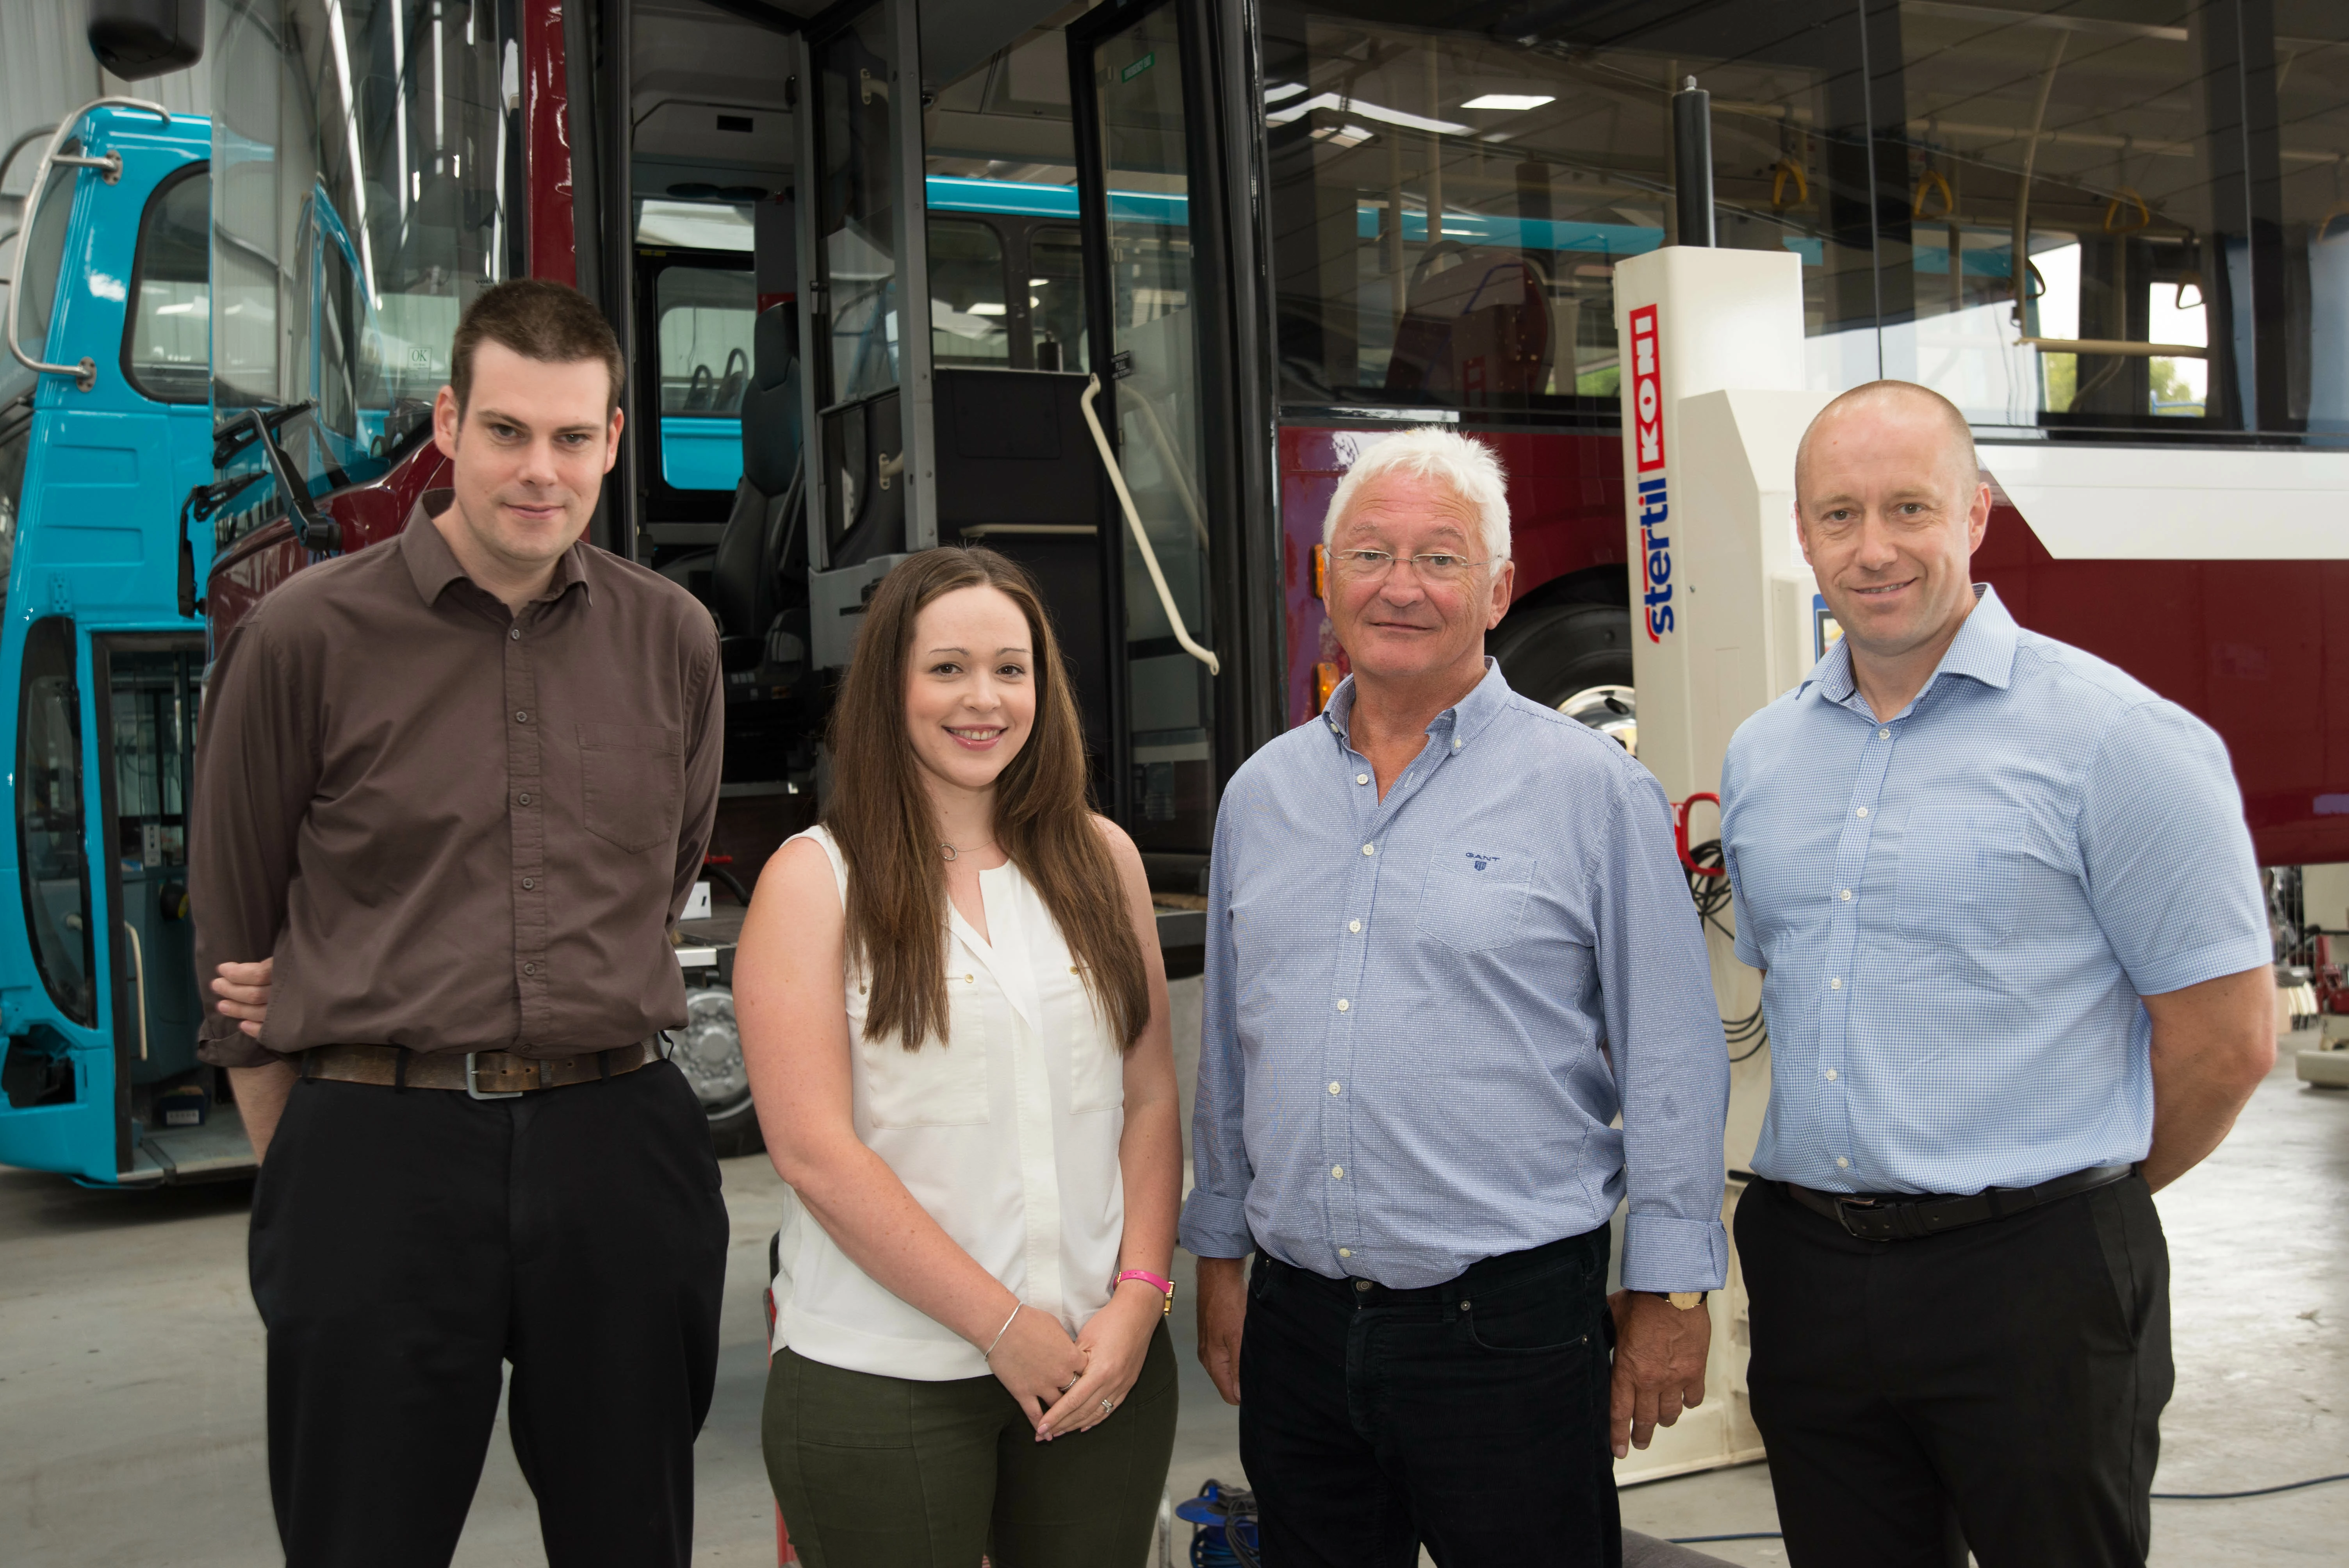 L-R: Chris Walker and Katy McIntosh (Rural Growth Network) with George Thornton (Thornton Brothers) and Gary Roe (Arch)